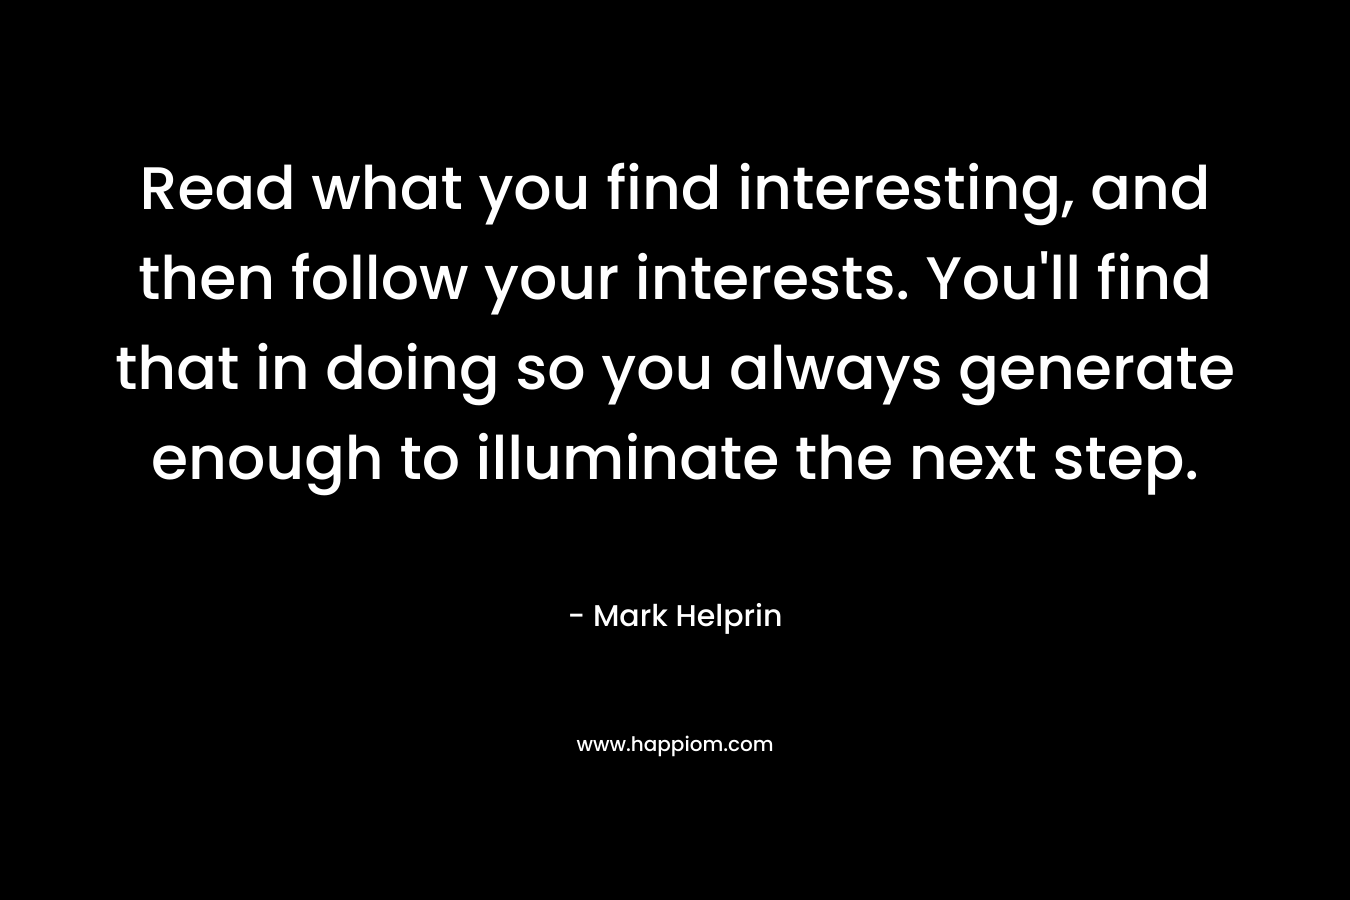 Read what you find interesting, and then follow your interests. You’ll find that in doing so you always generate enough to illuminate the next step. – Mark Helprin